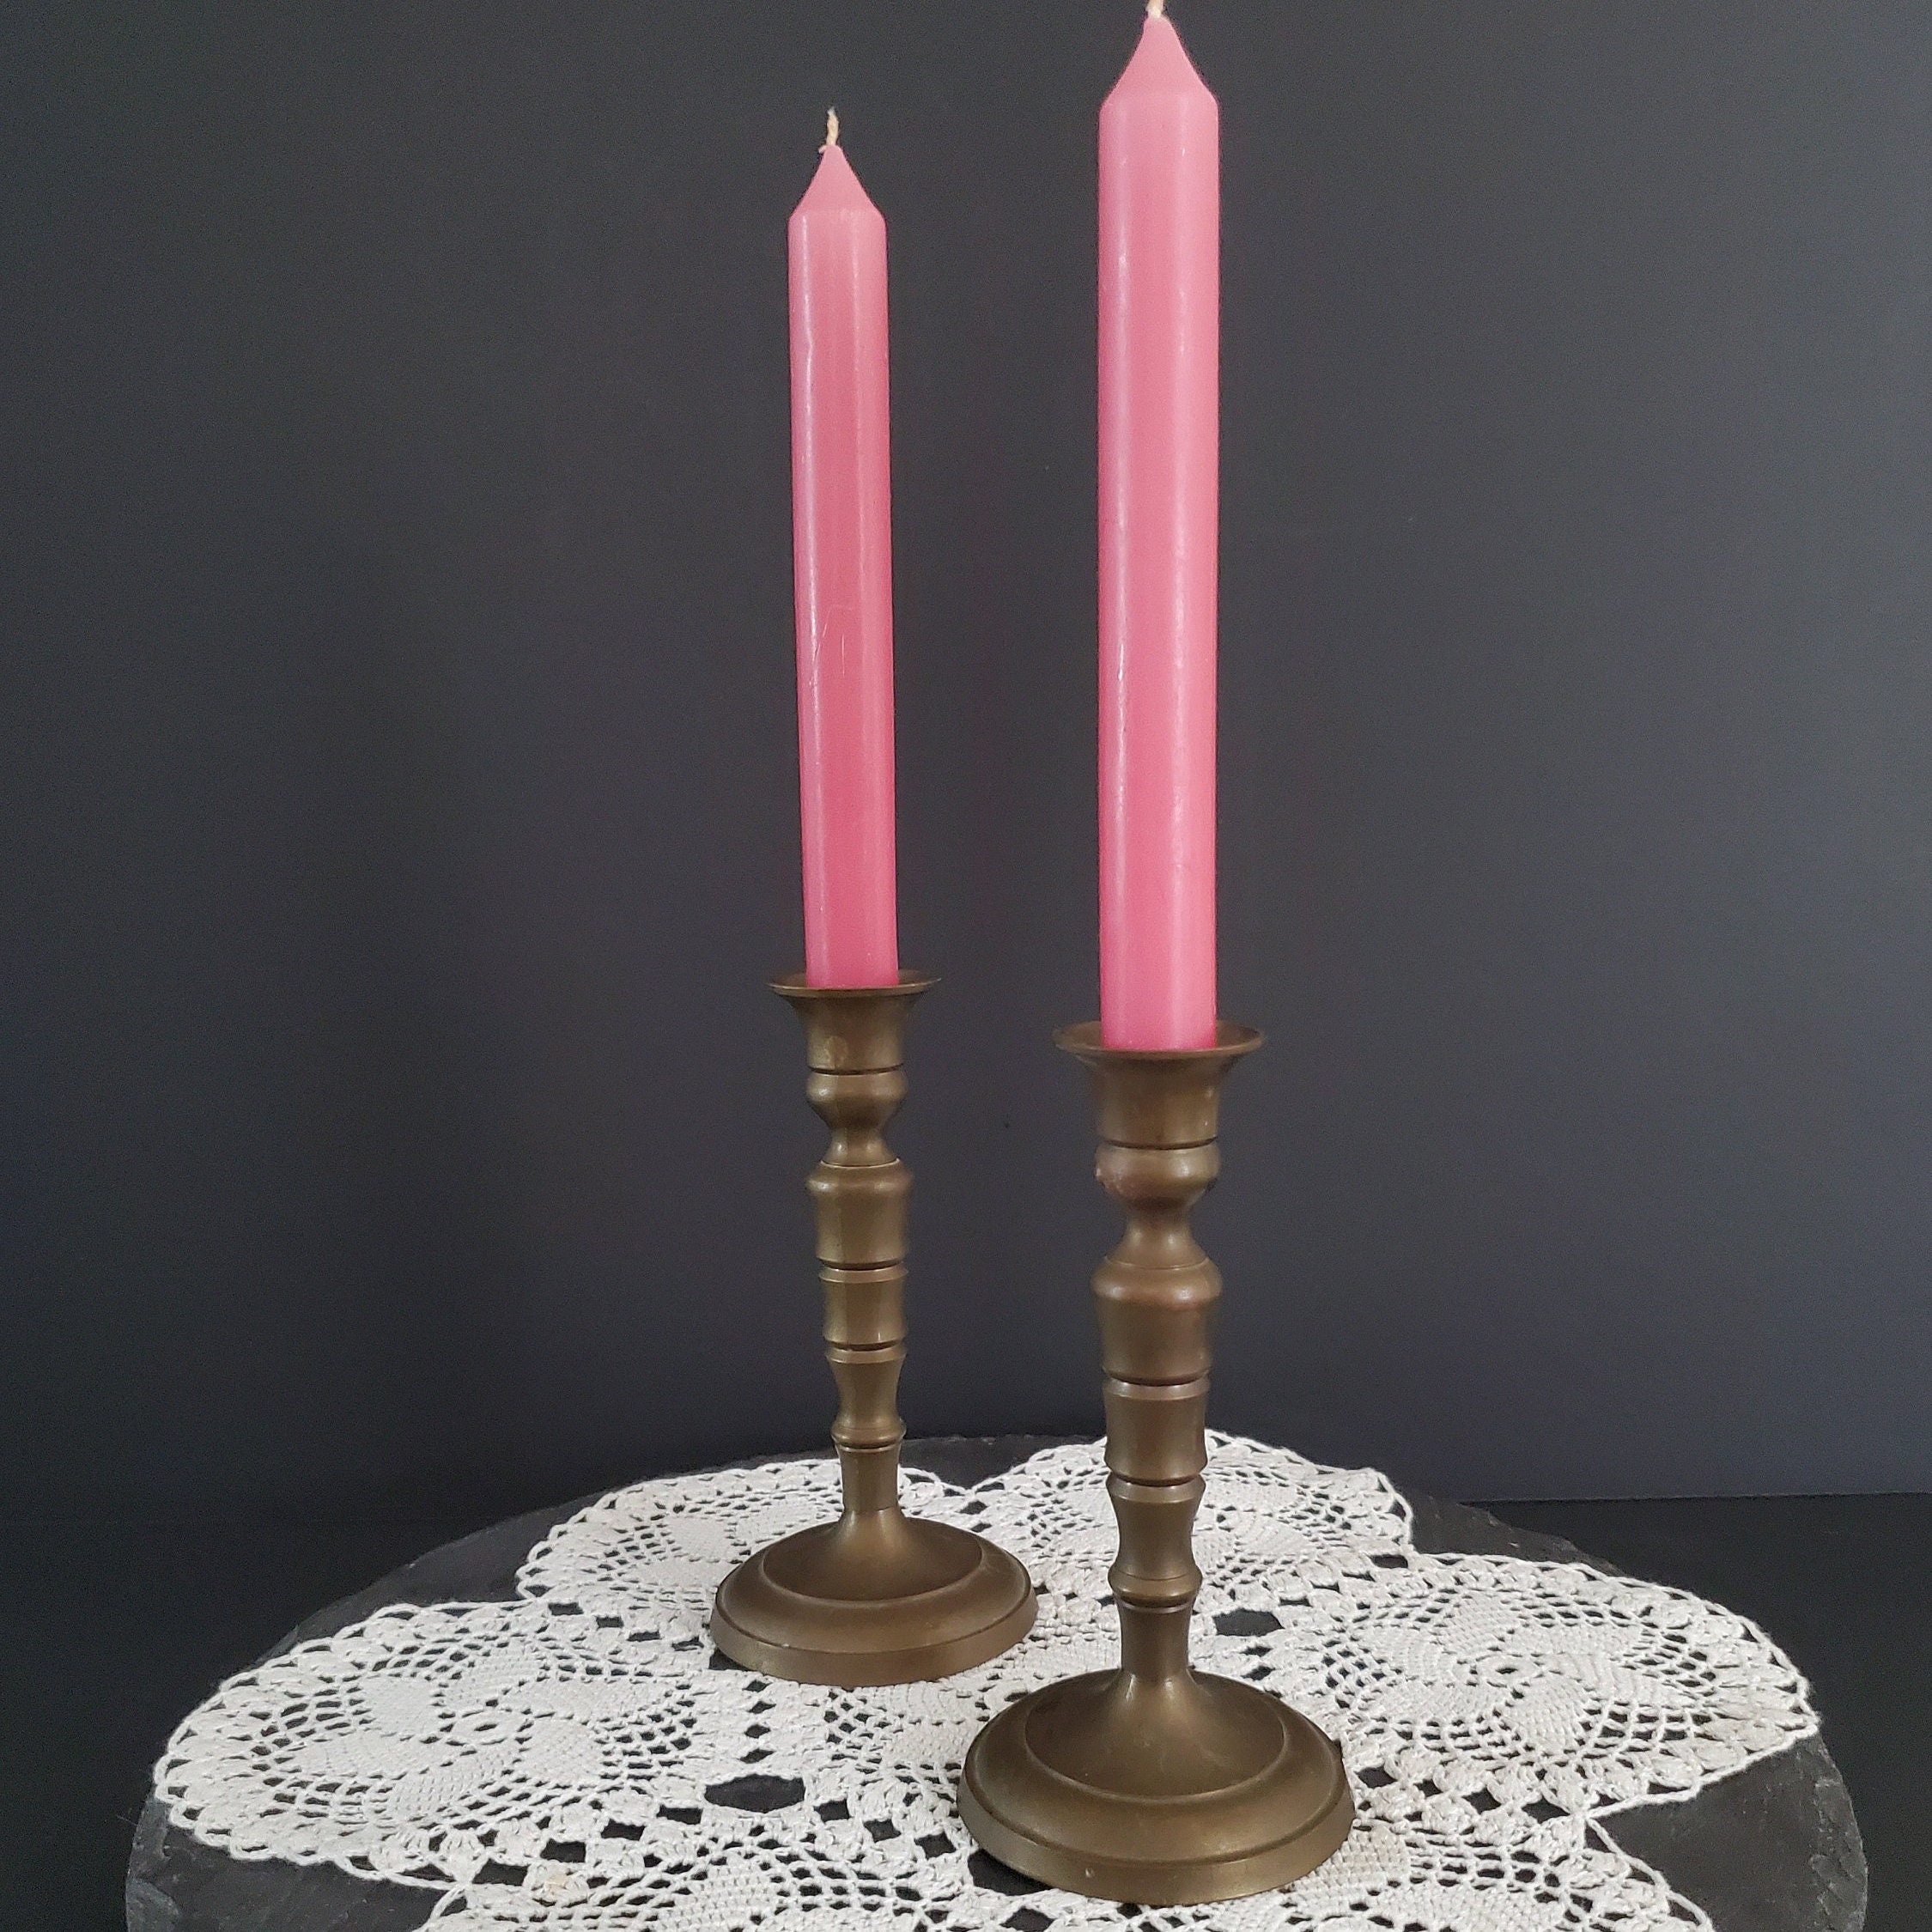 Indian Brass Candle Sticks, Pair of Vintage Taper Candle Holders